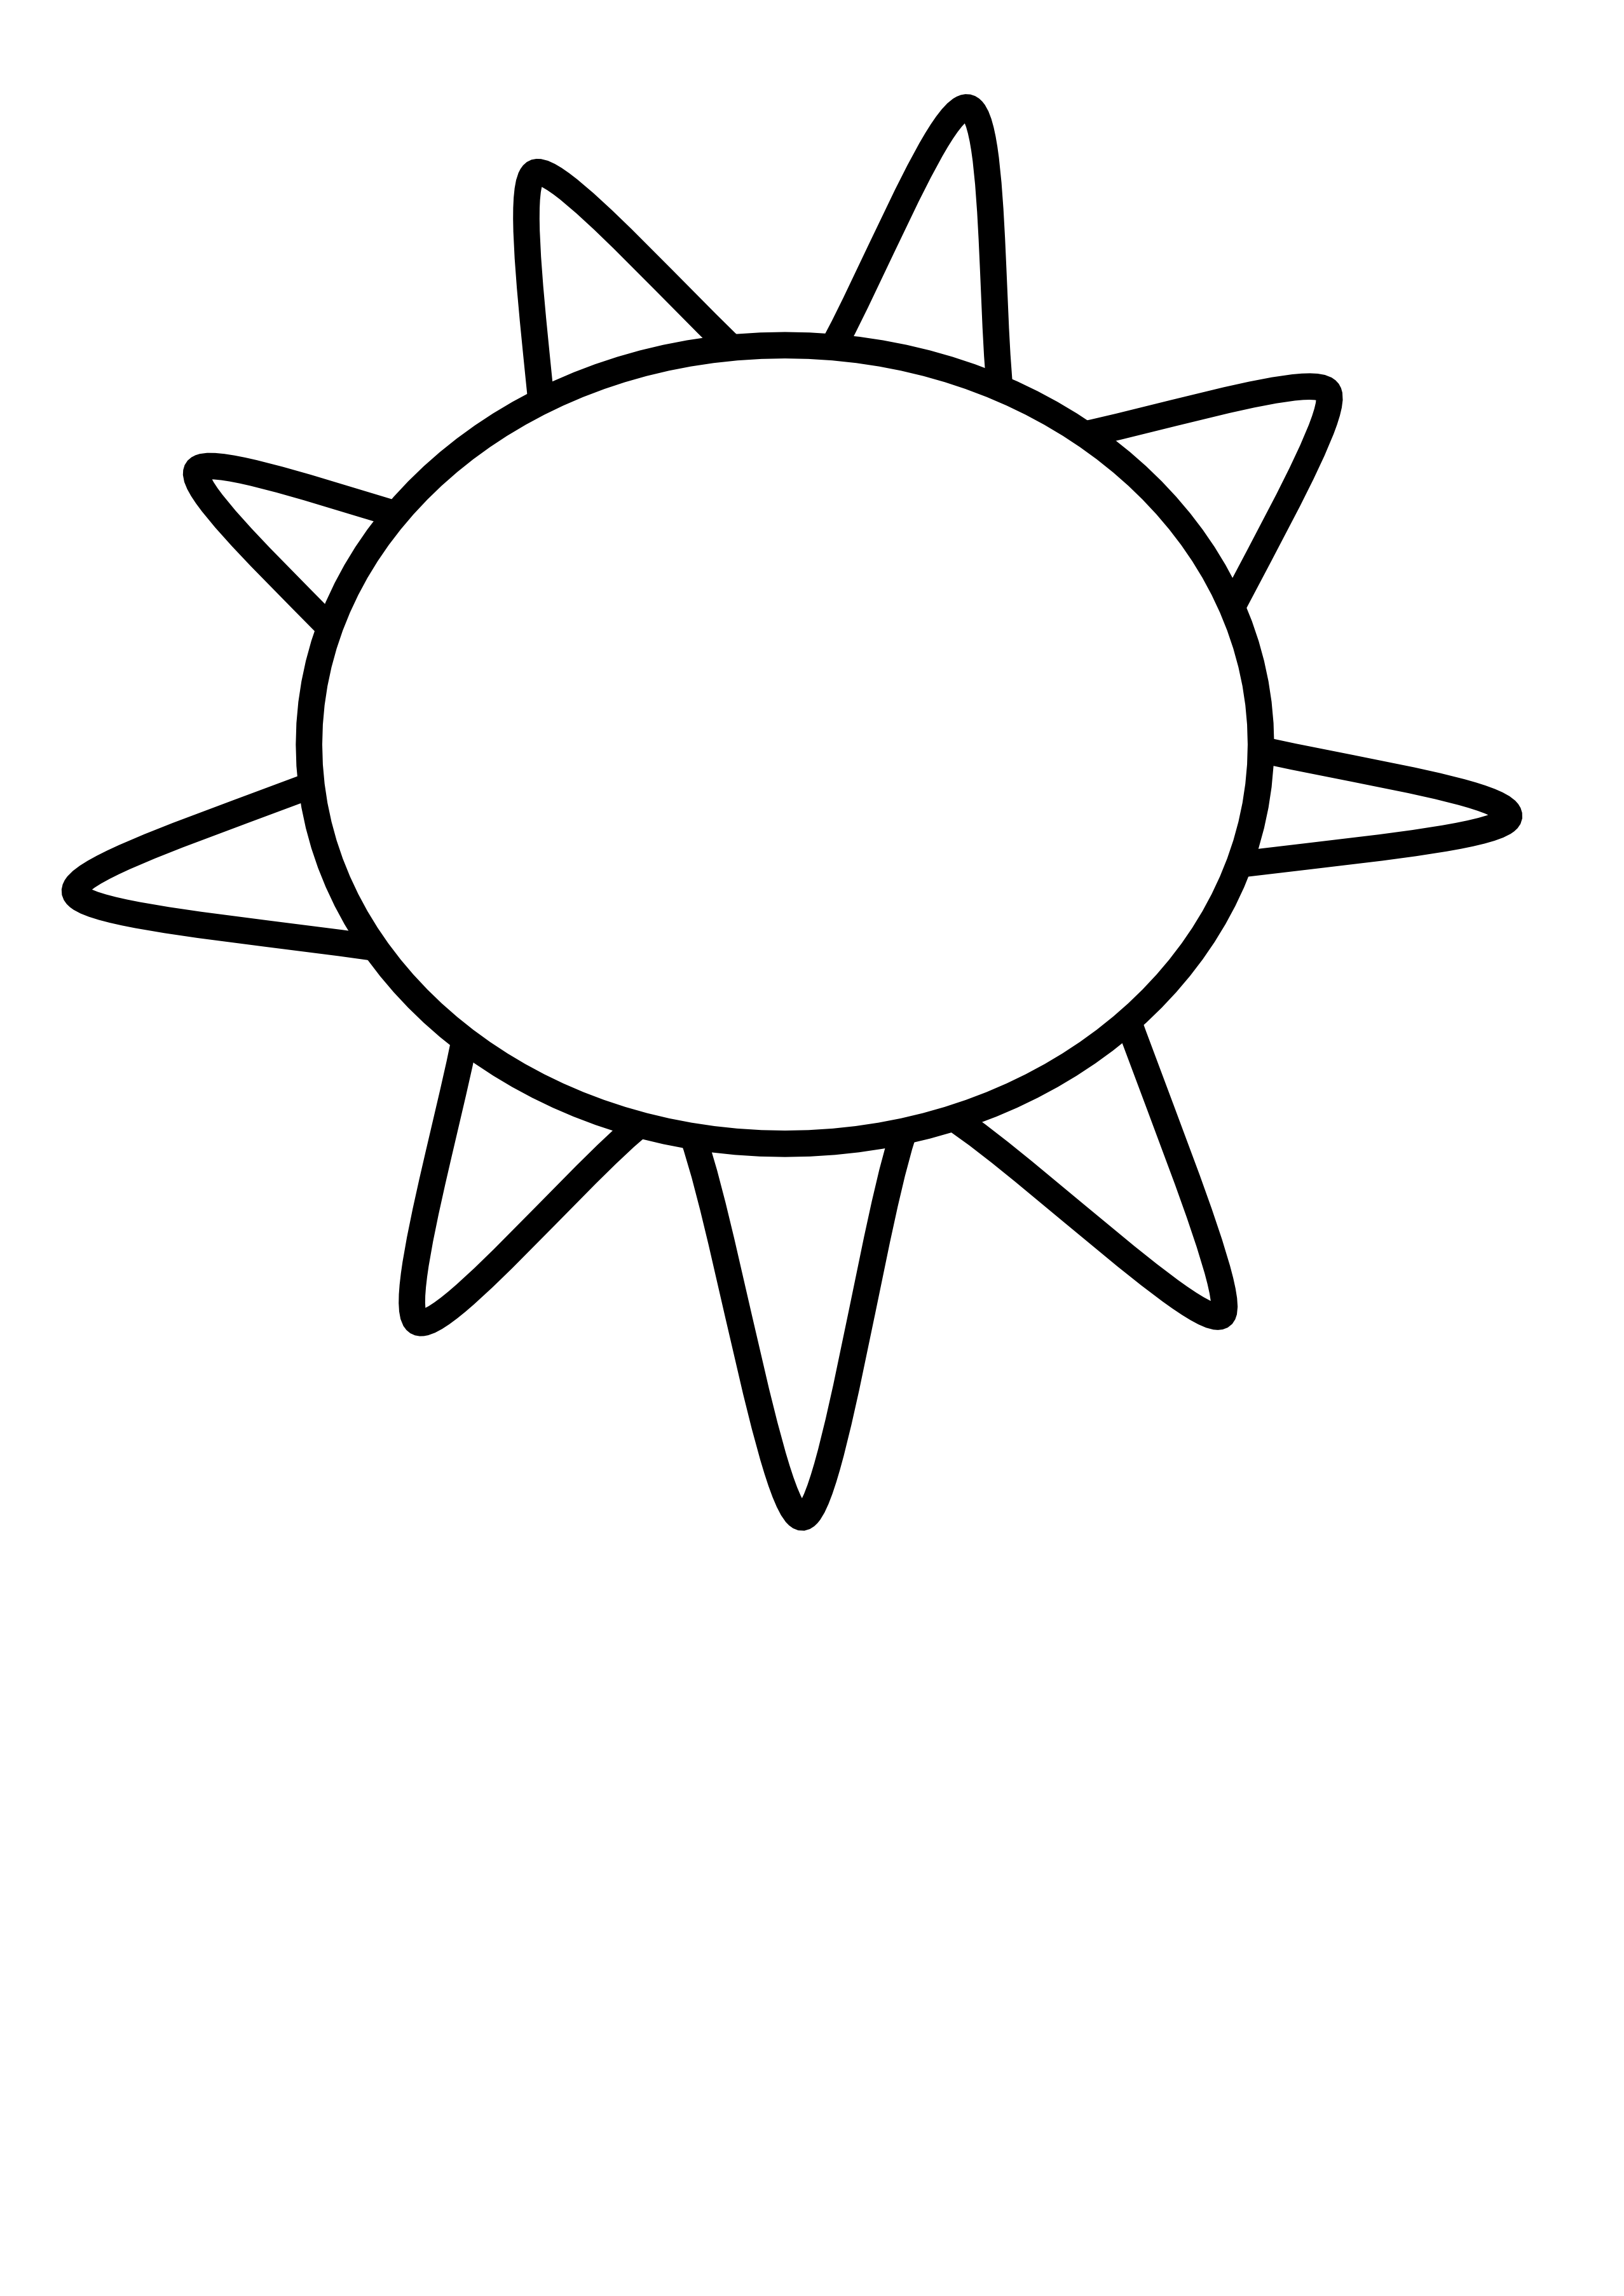 Sun Clip Art Black And White | Clipart library - Free Clipart Images